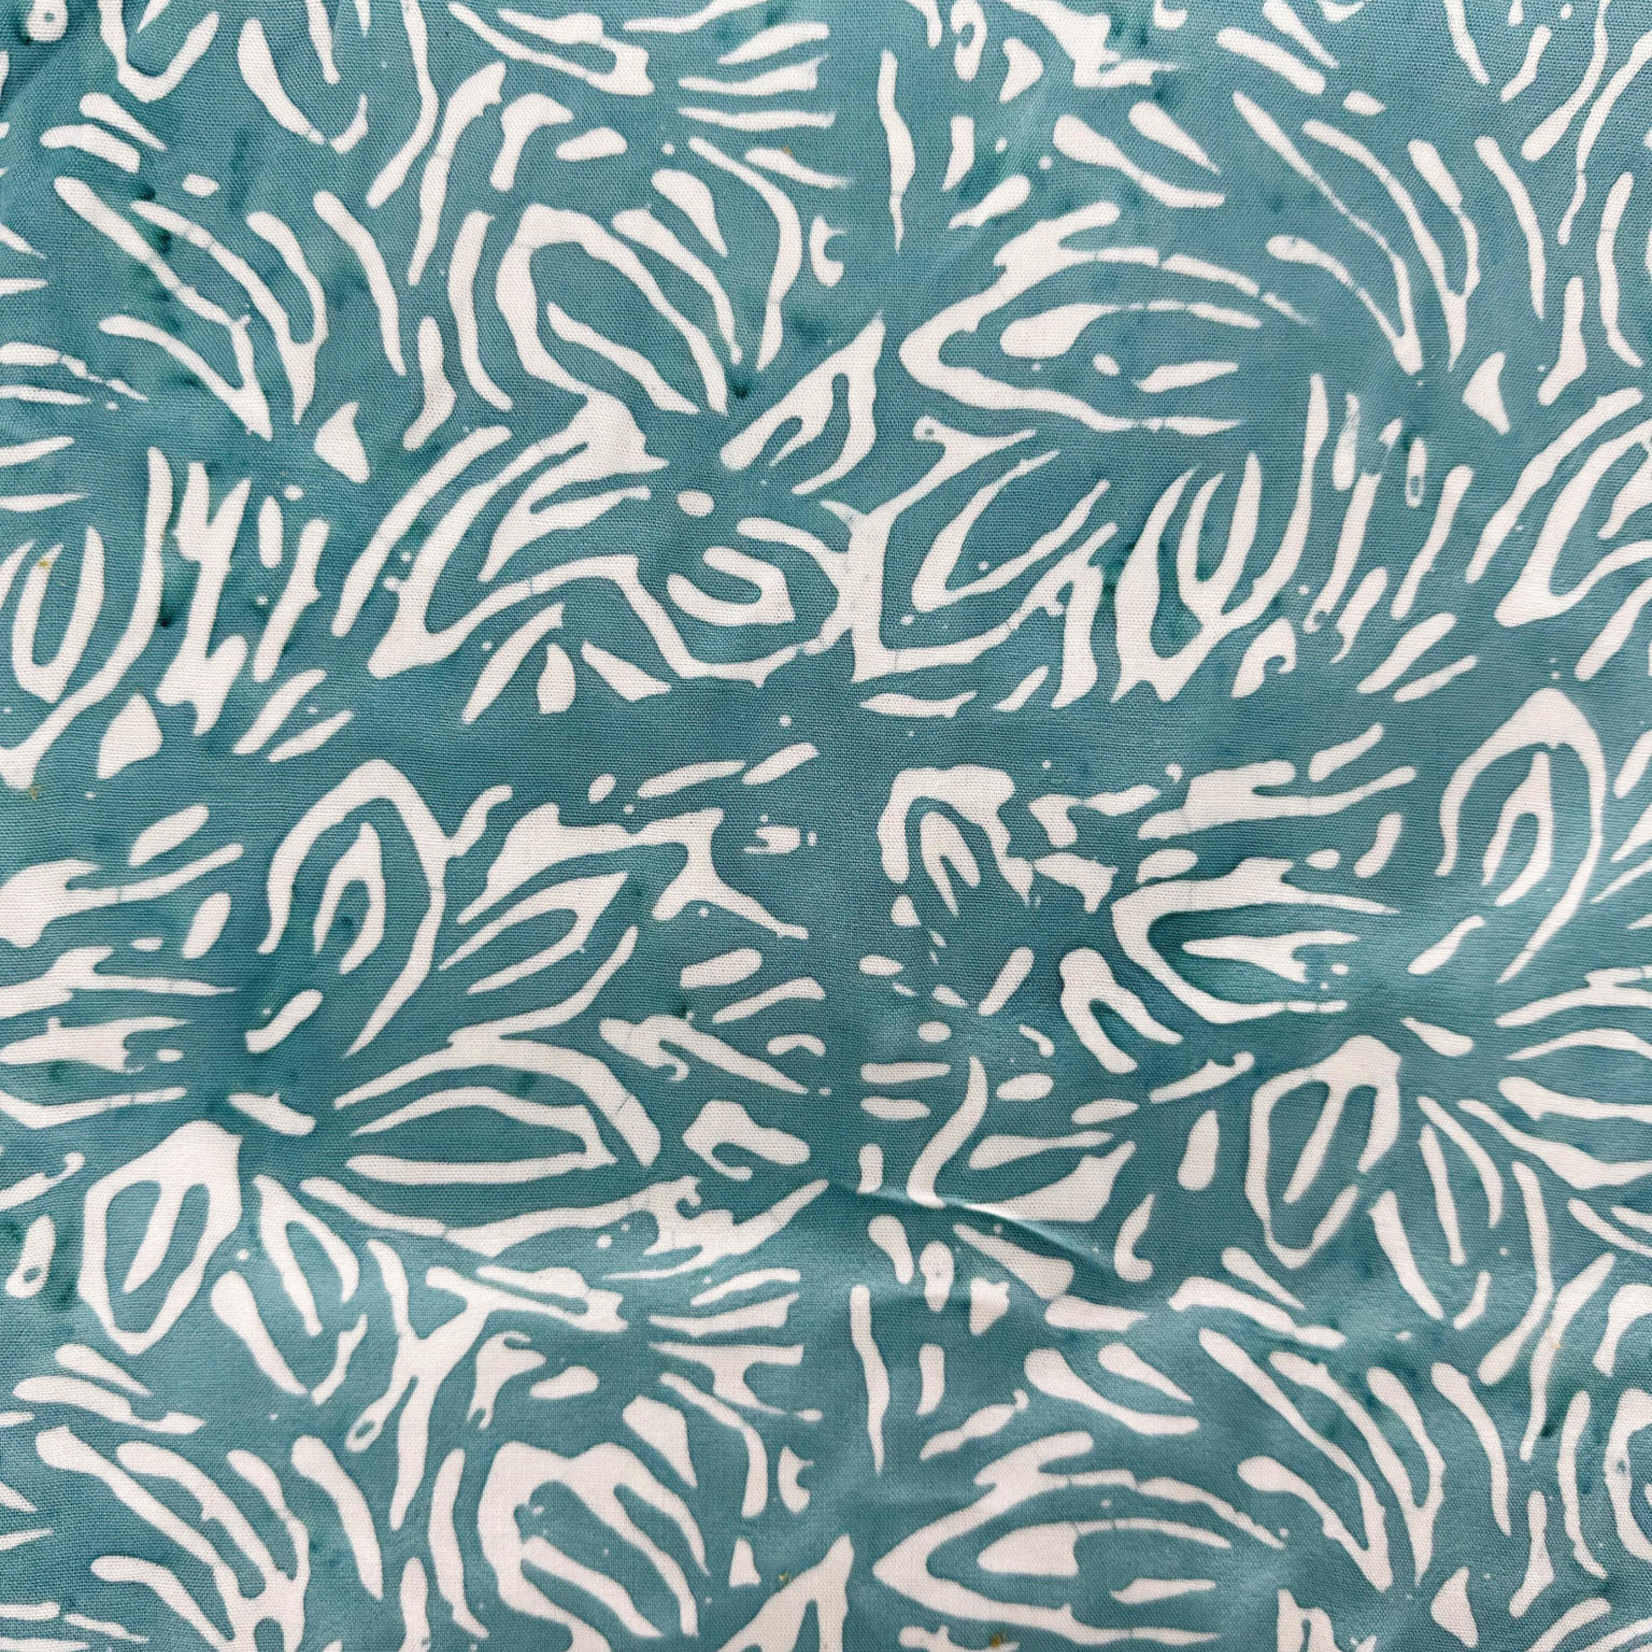 Batik Sarong Teal and White Flower Motif With Tassels and Coconut Sarong Tie